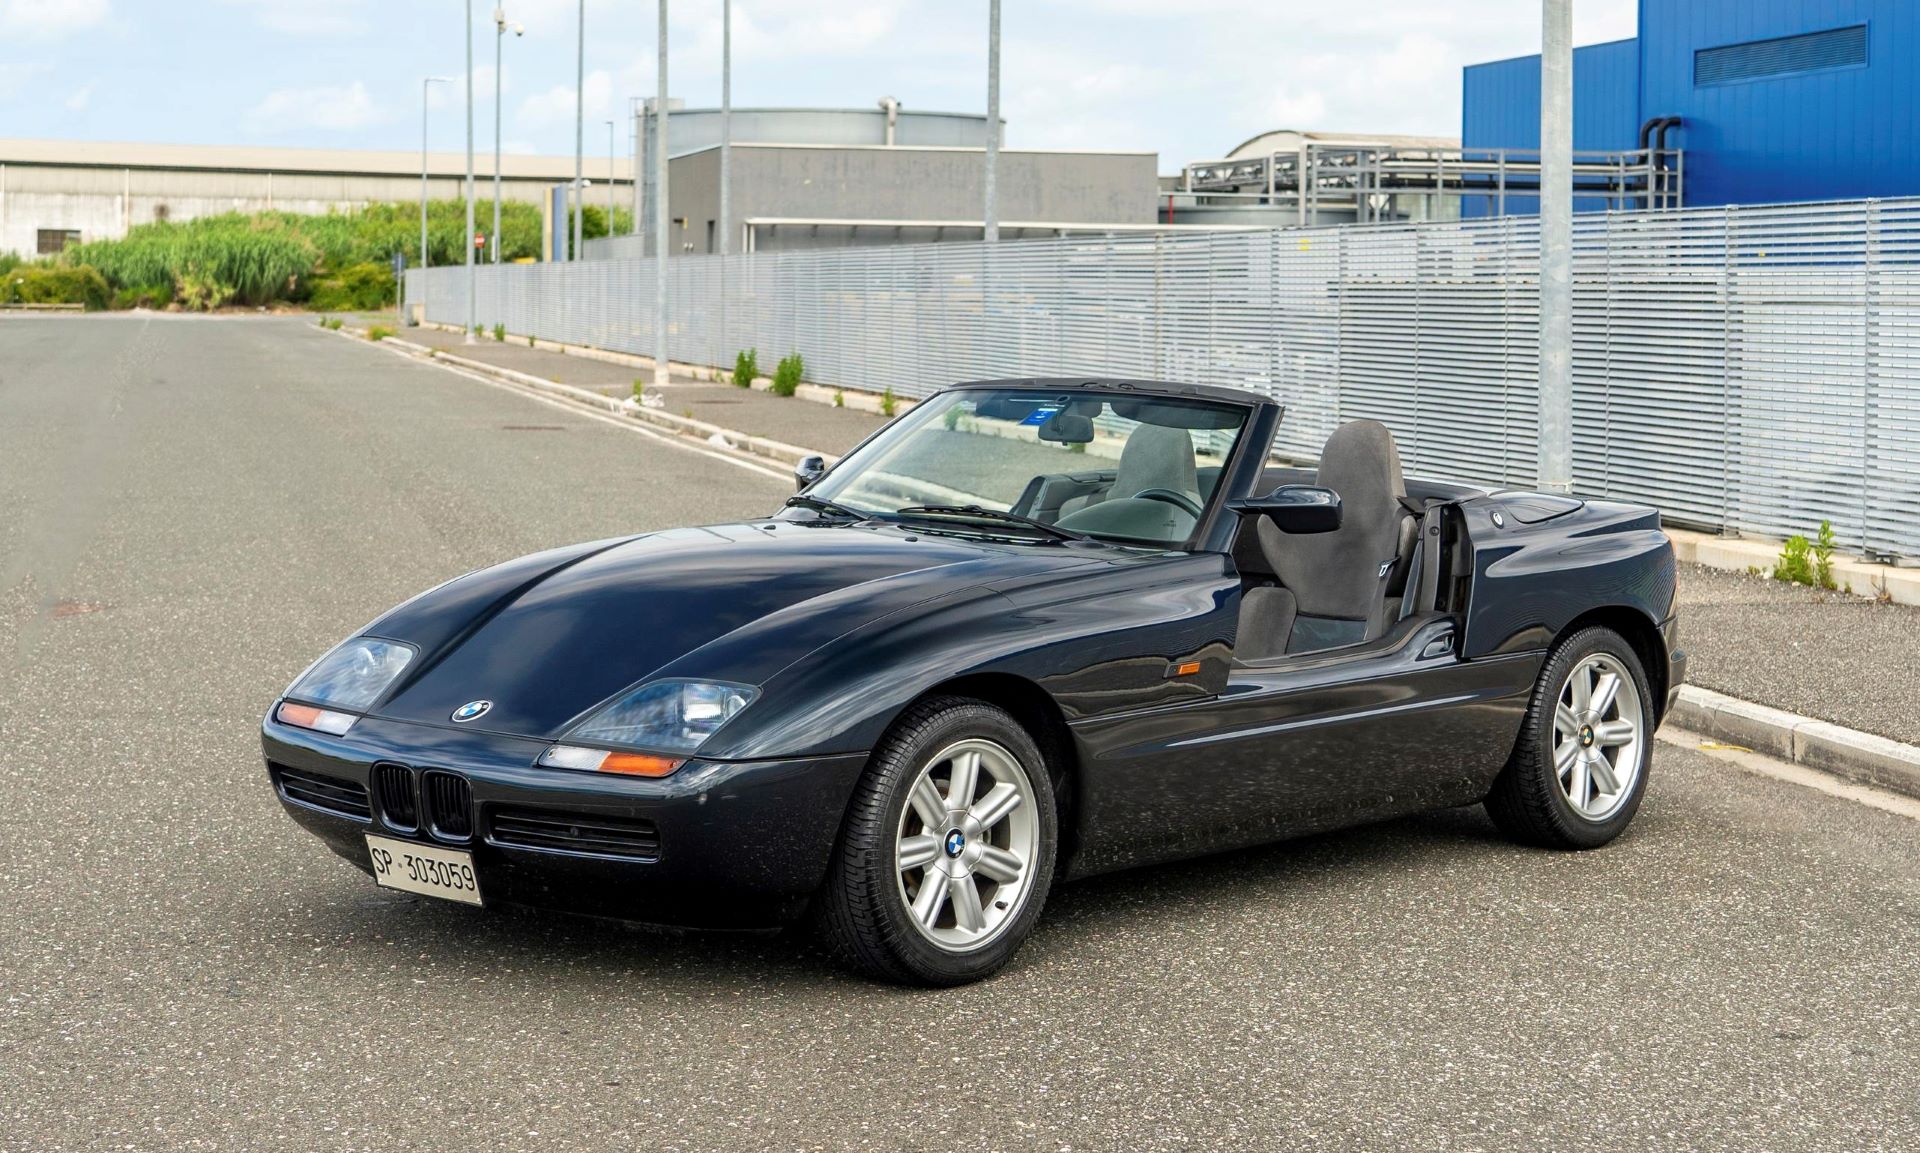 5,800 mile BMW Z1 to be auctioned by Car & Classic